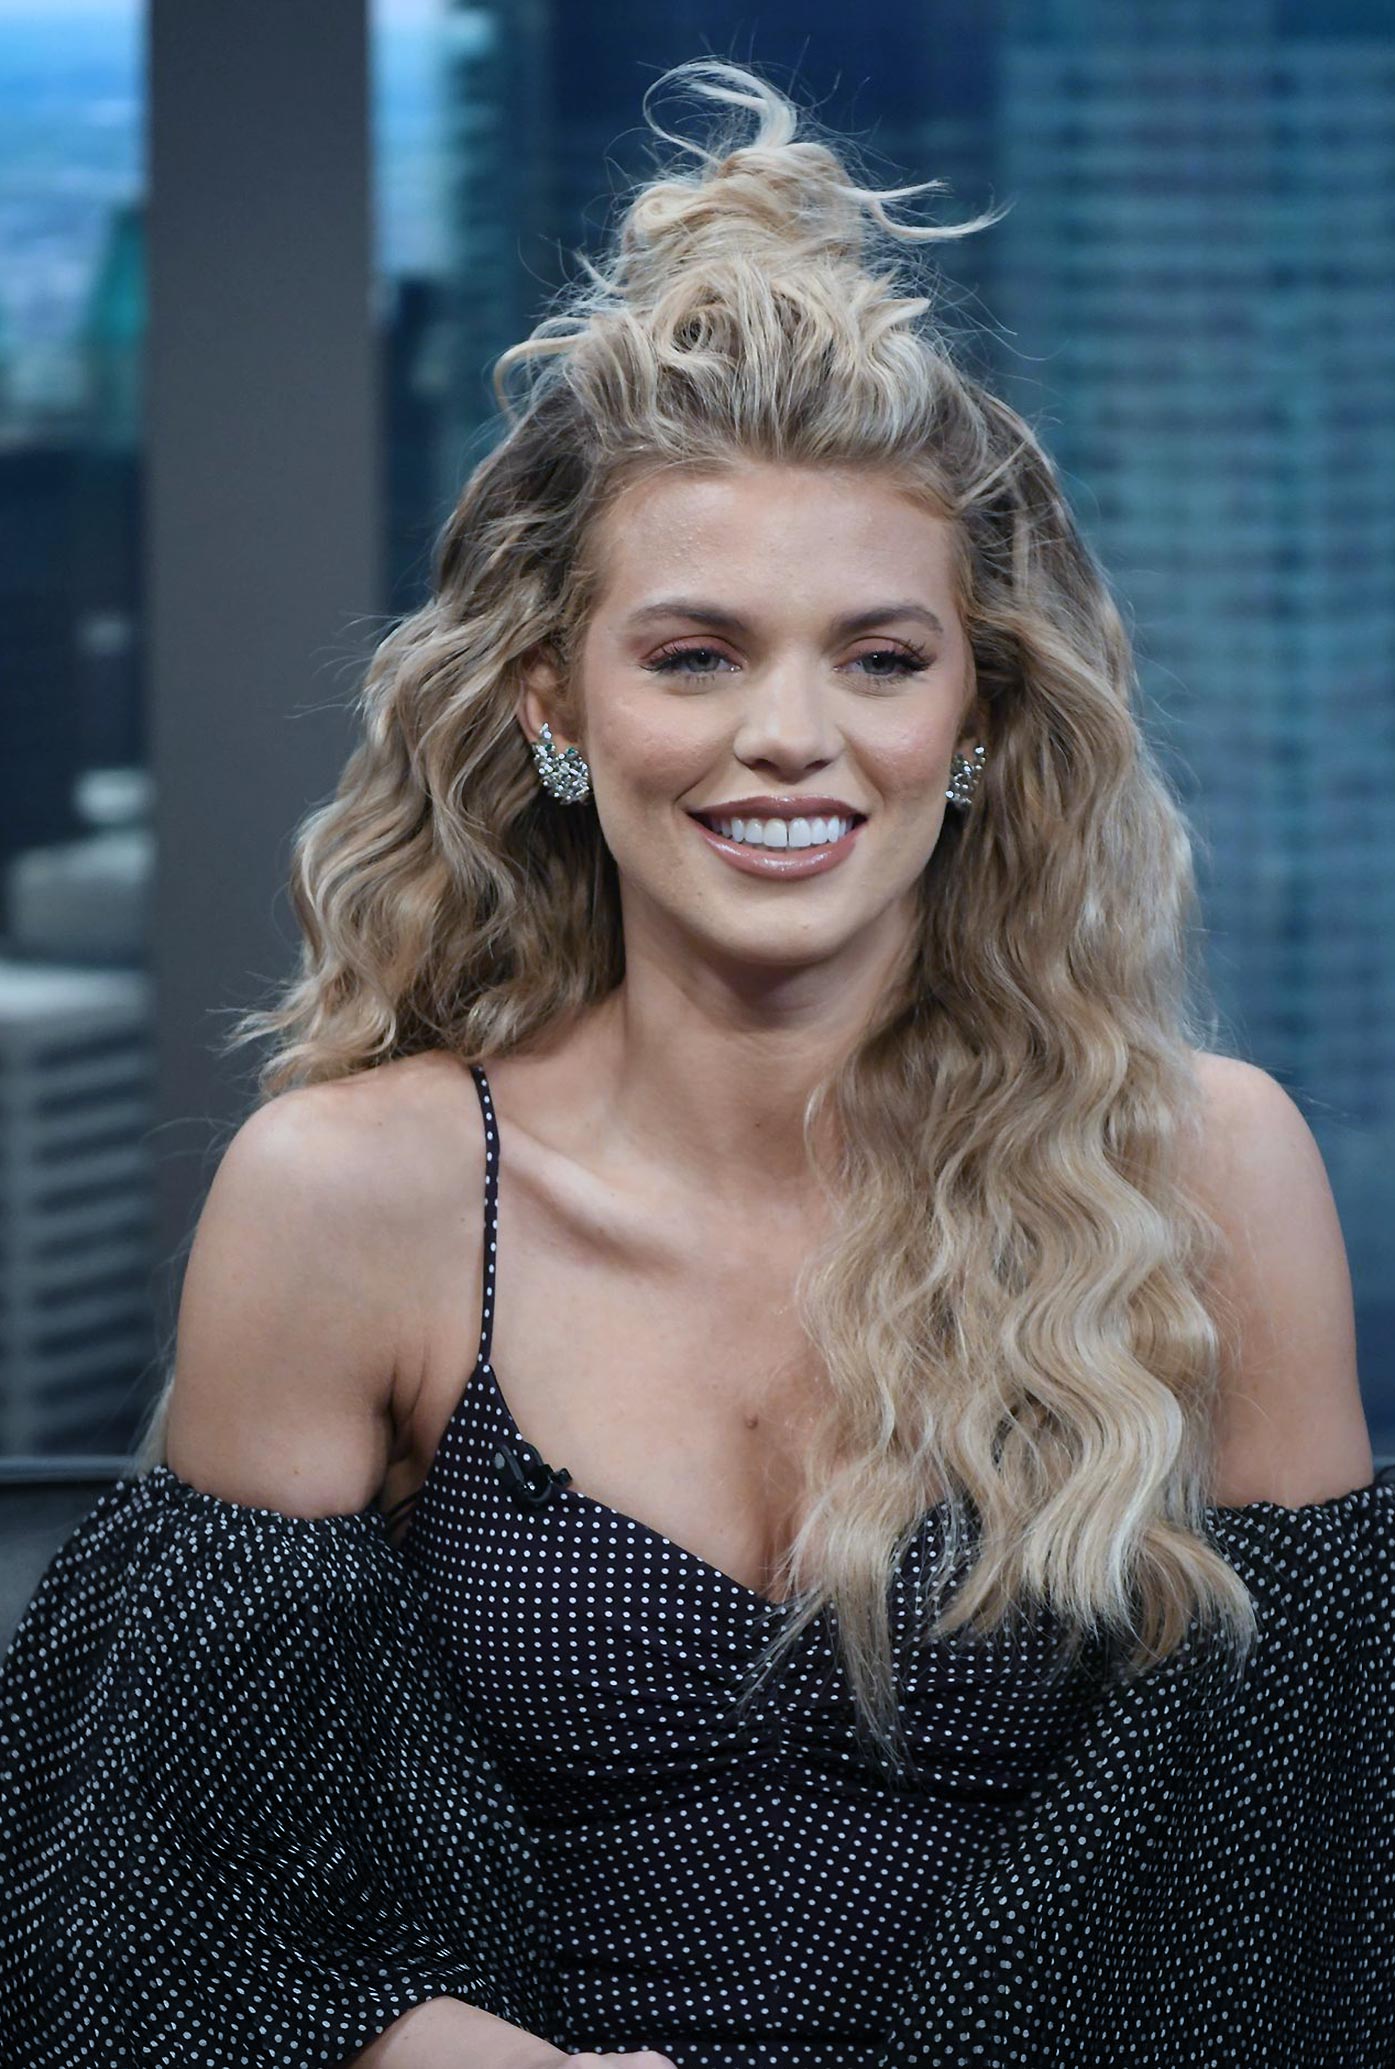 AnnaLynne McCord Tits Almost Fell Out of Her Big Cleavage.